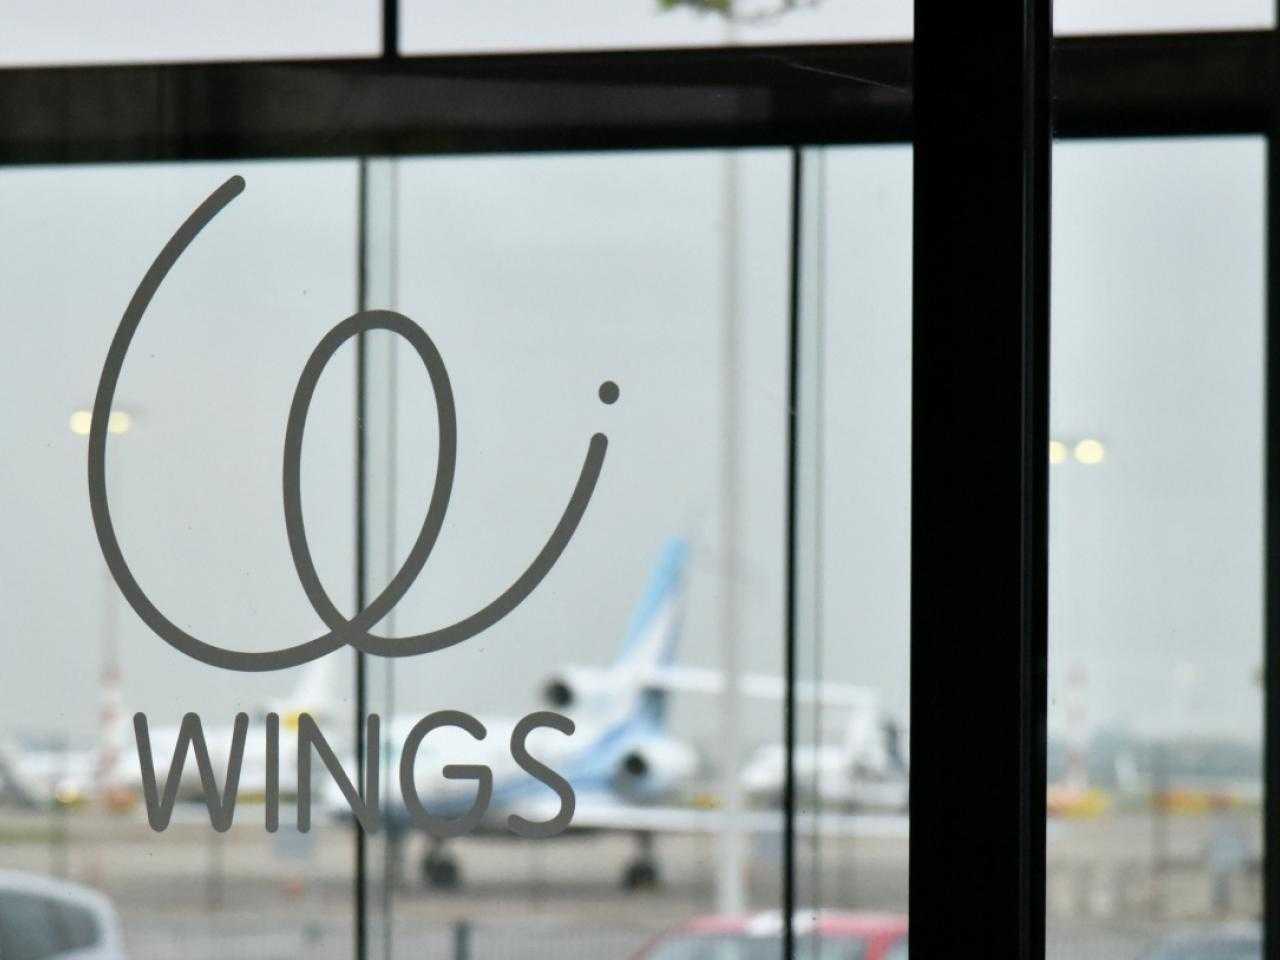 Name Wings on window with airplane in background